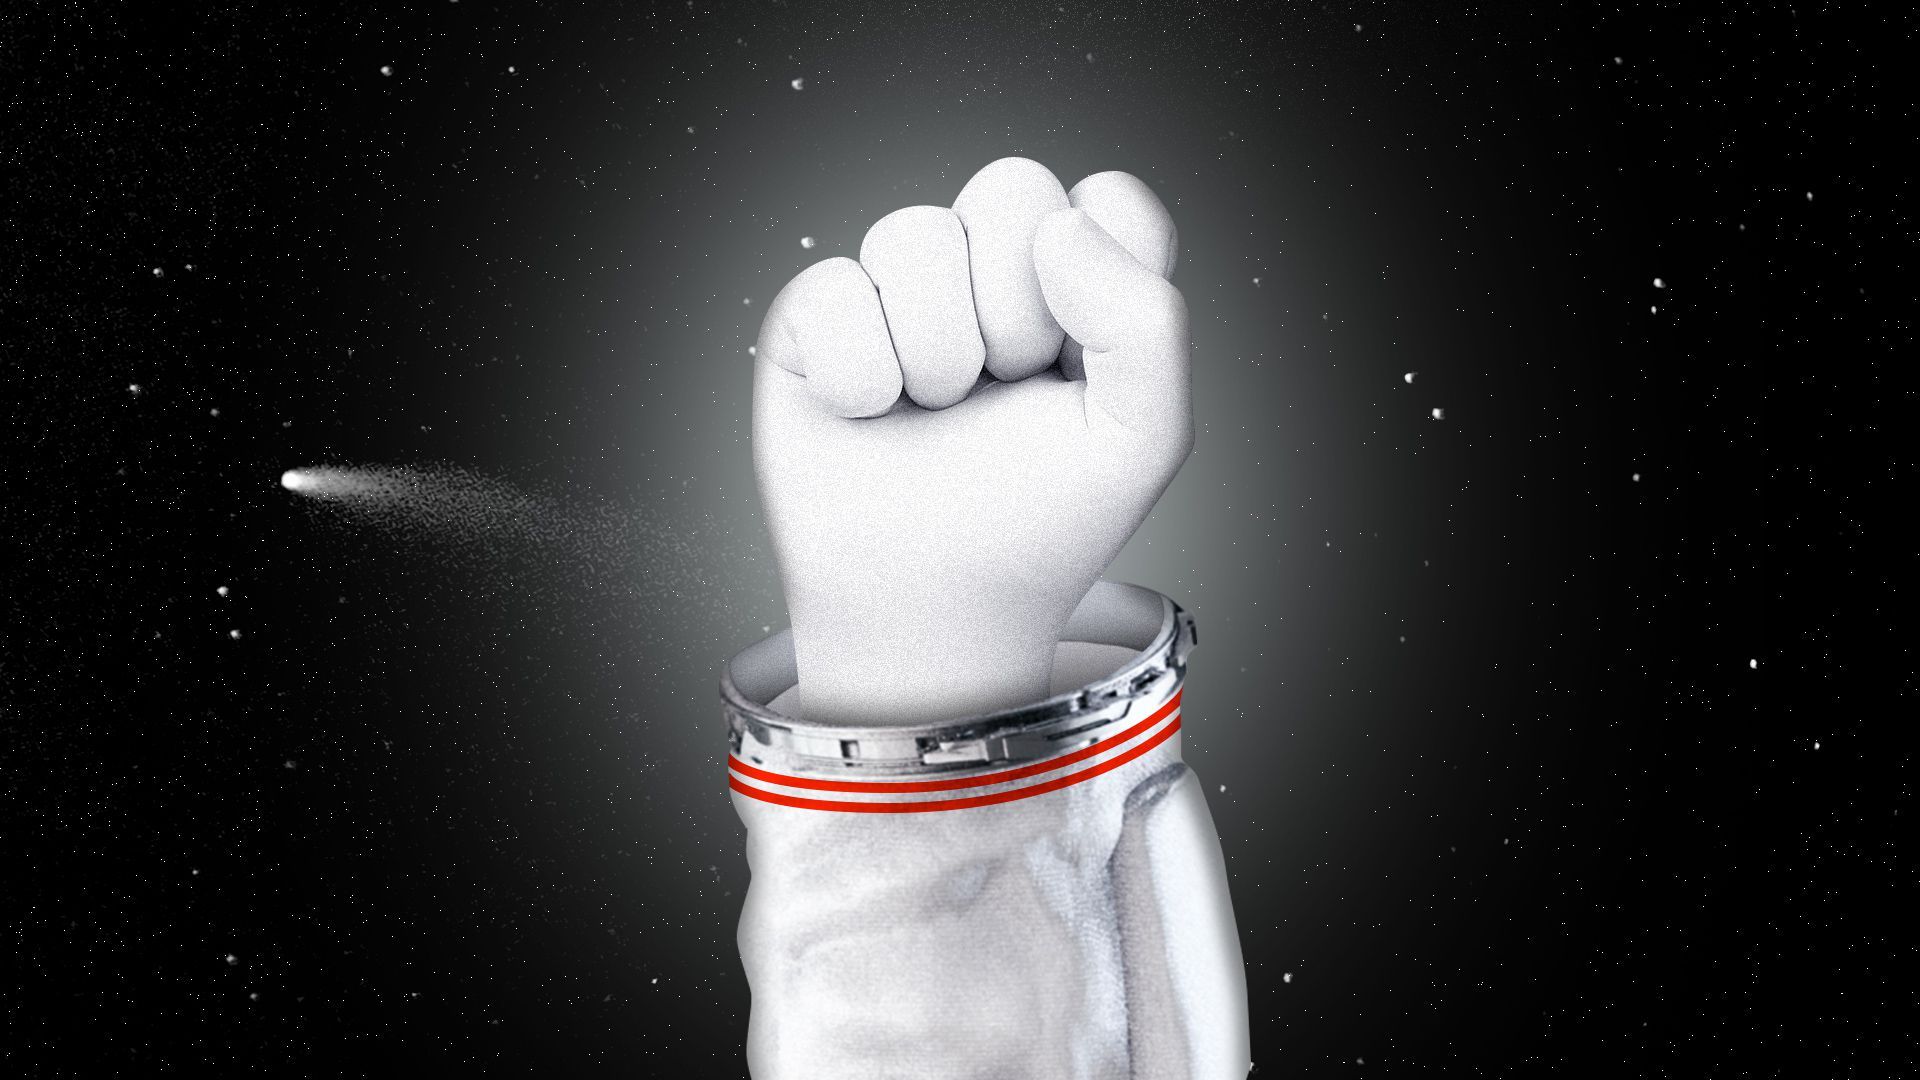 Illustration of an astronaut's fist against a space background. 